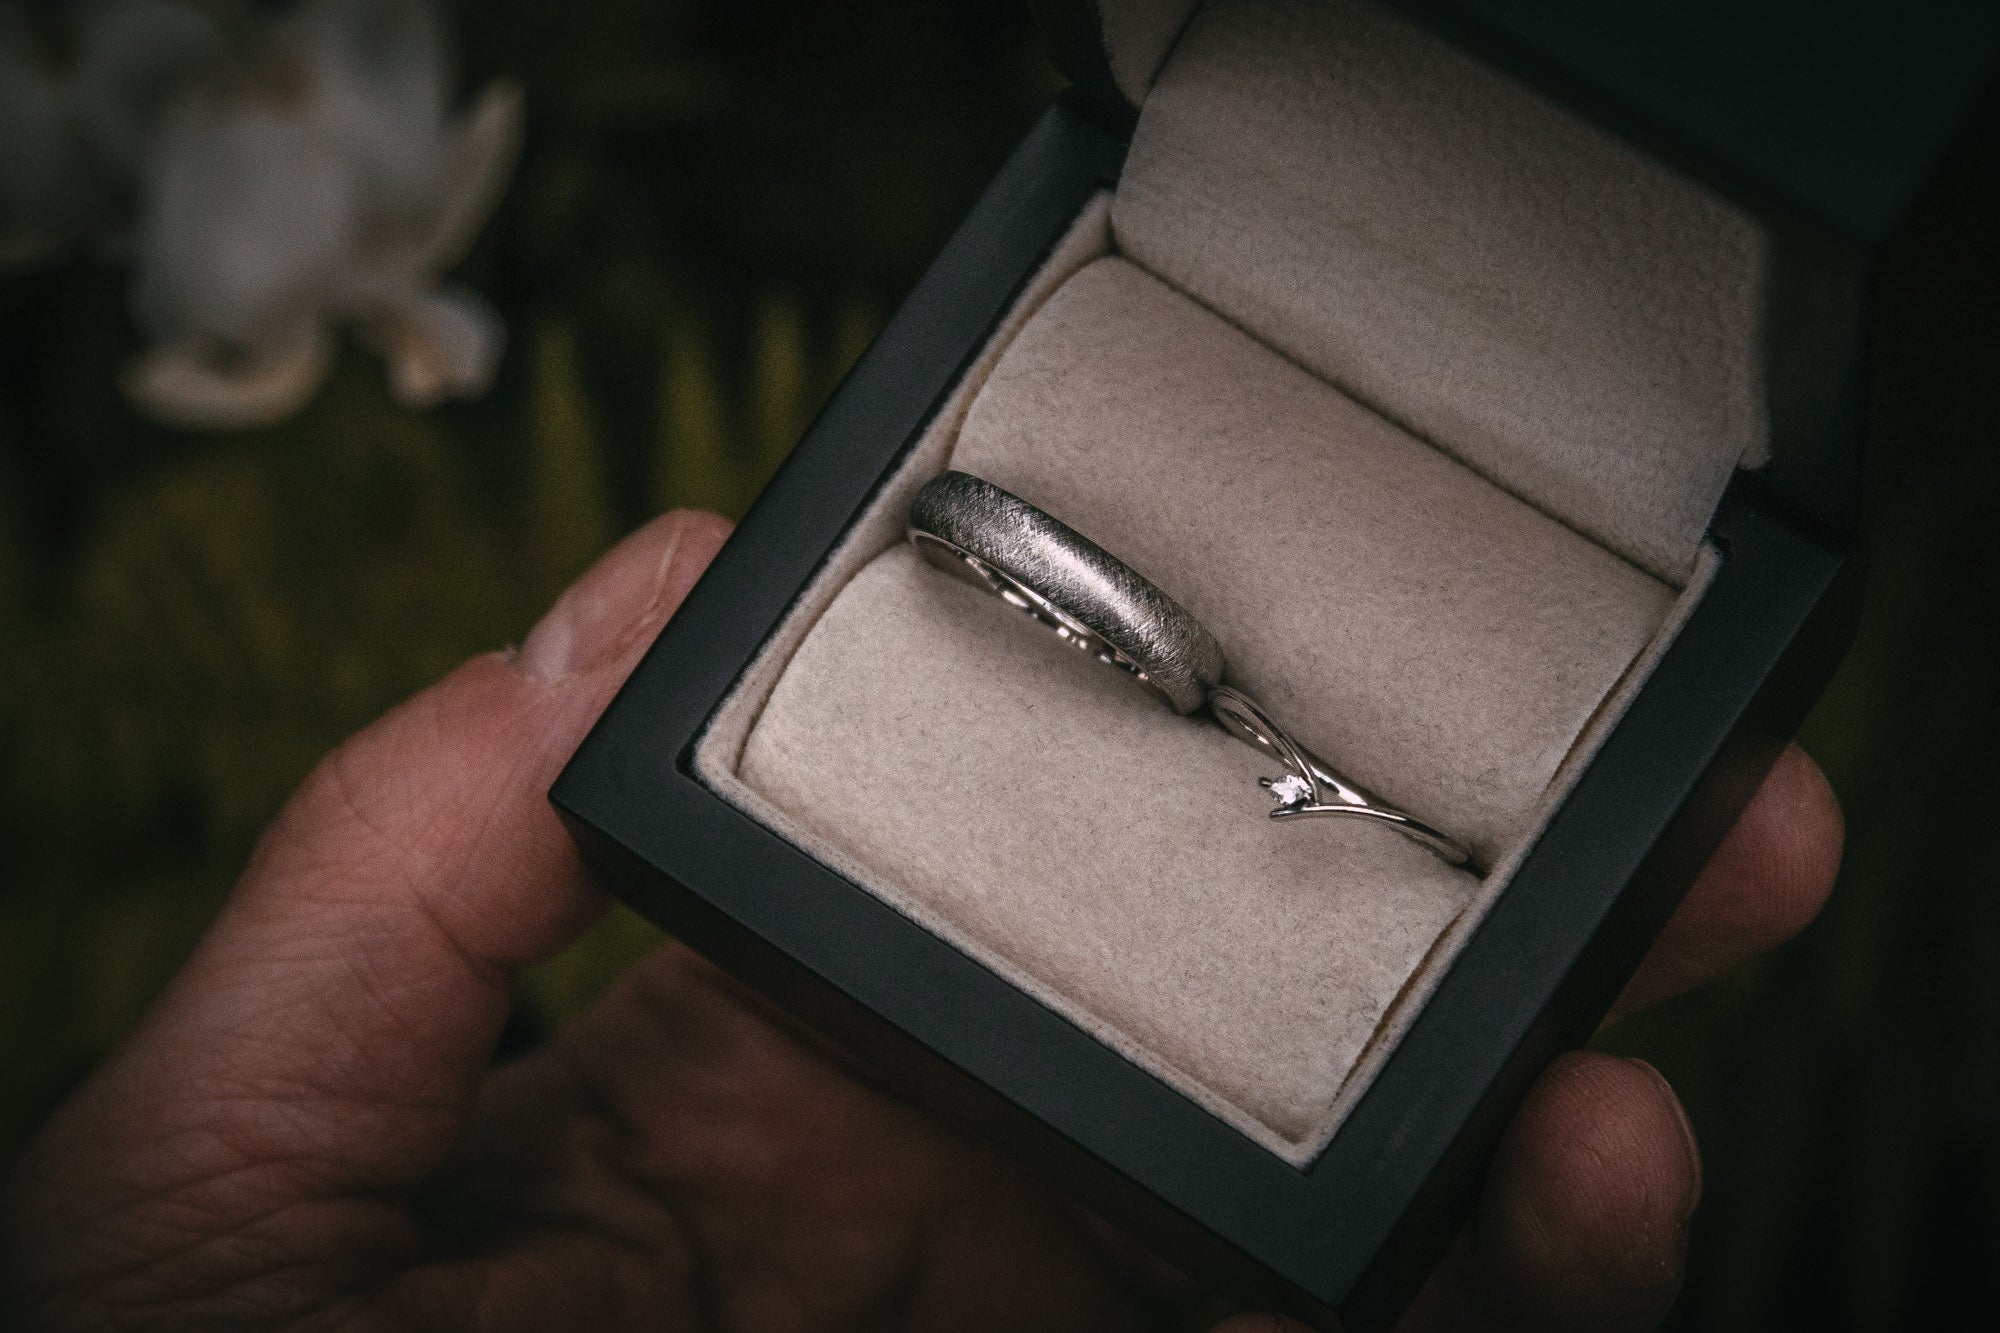 Bespoke Textured and fitted wedding rings